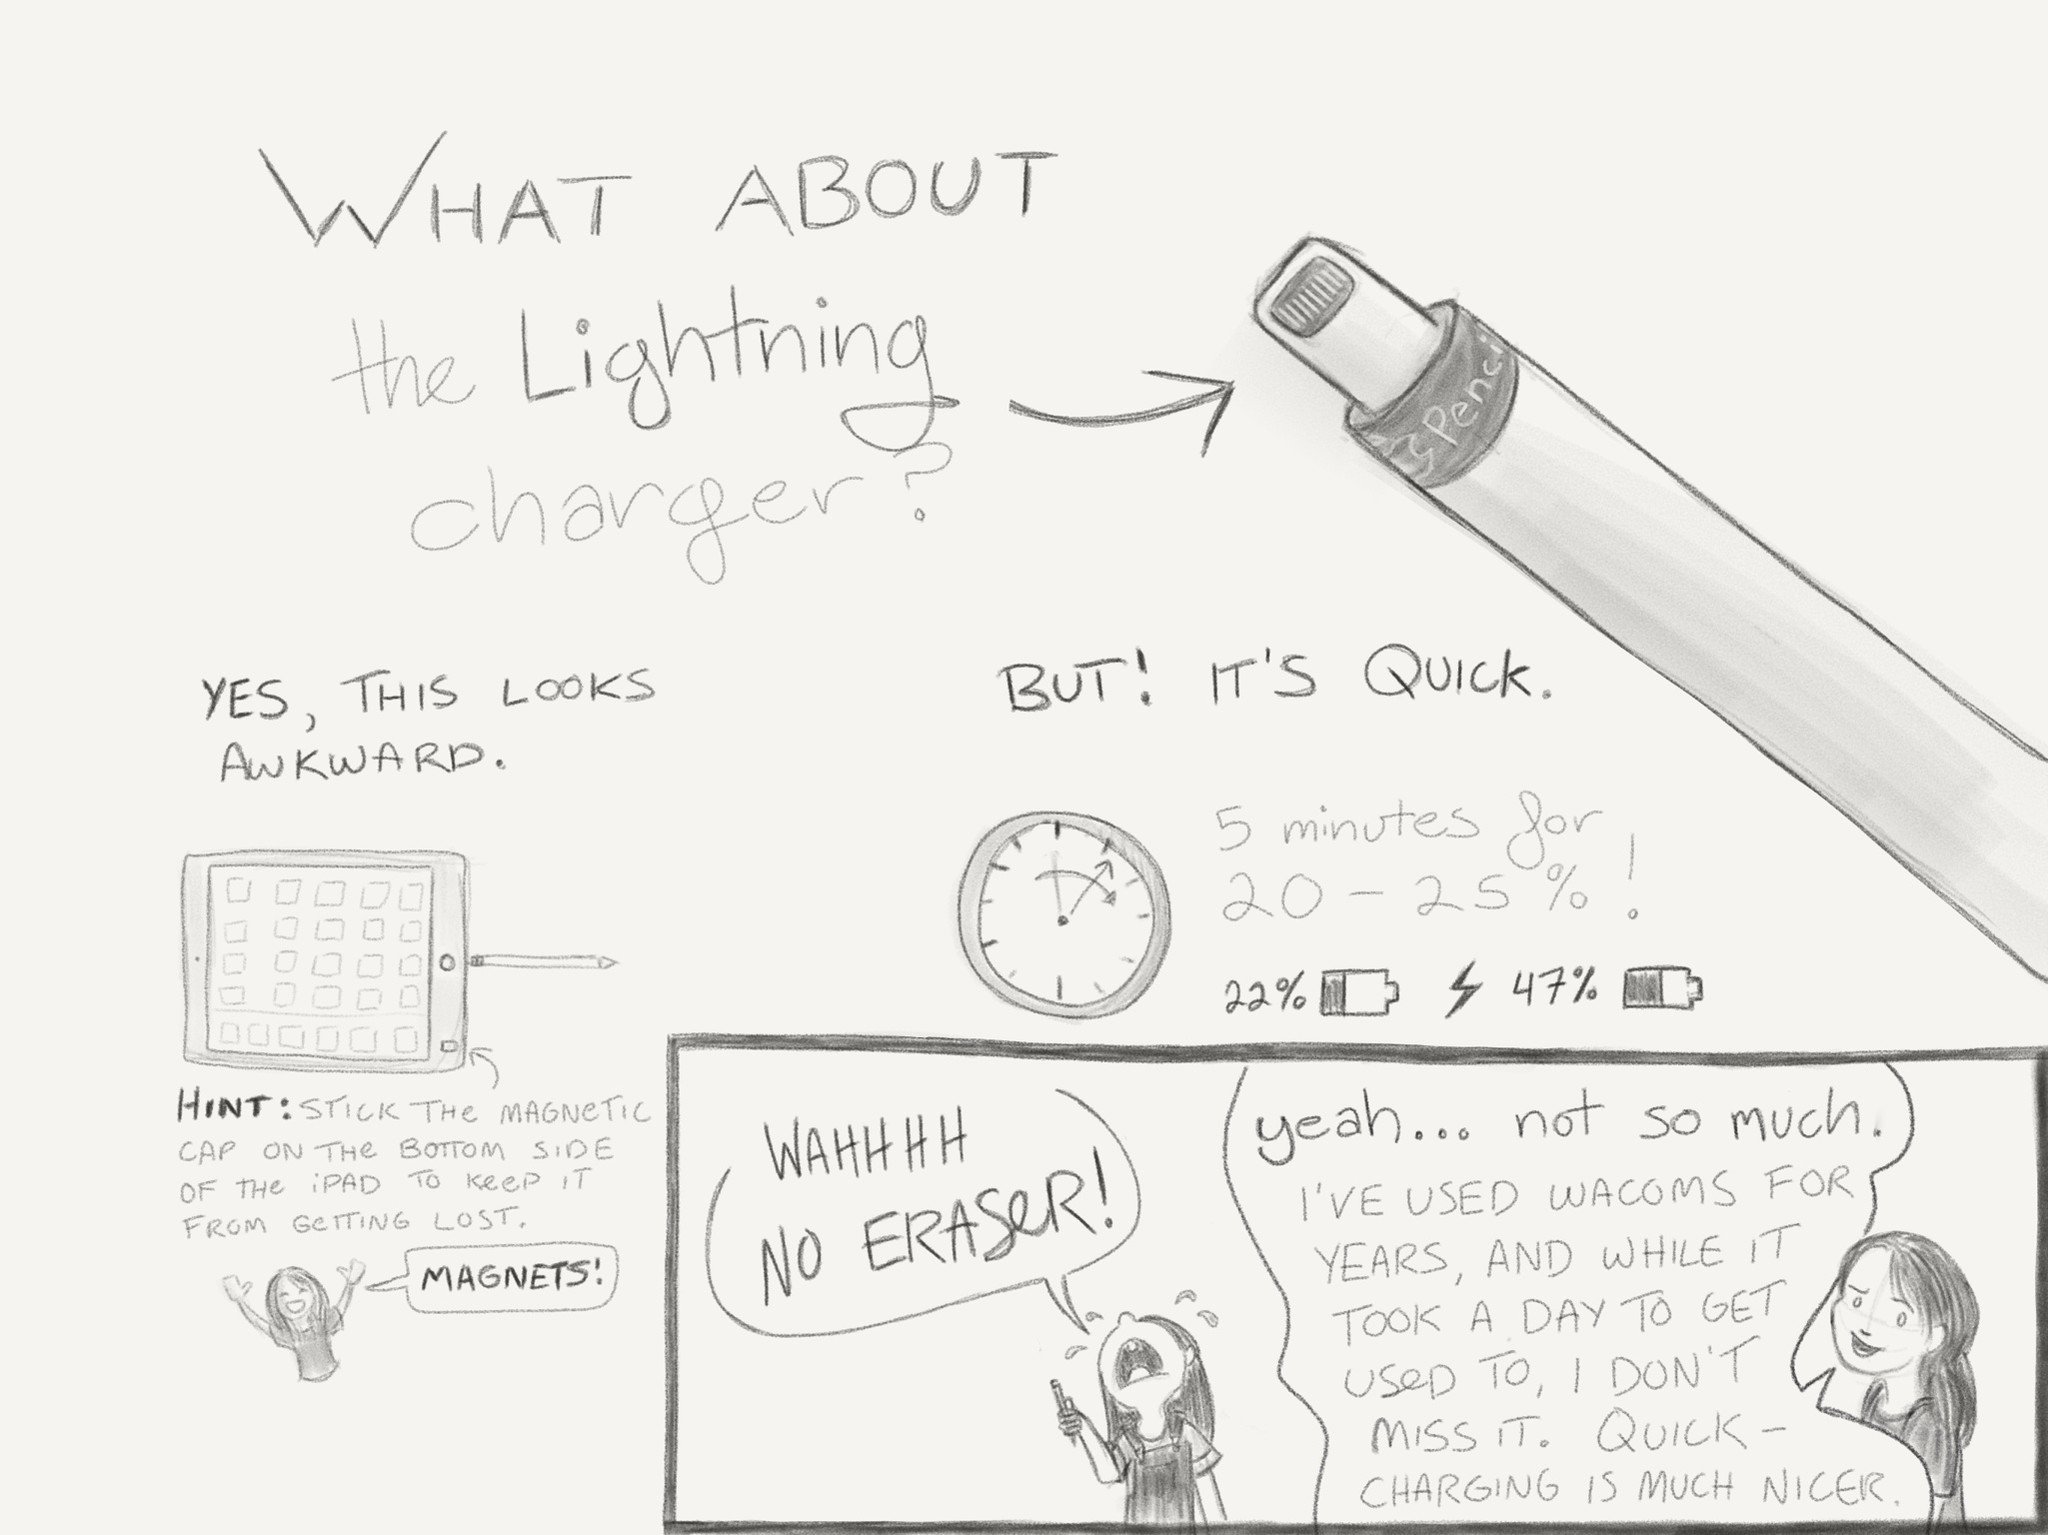 The Lightning charger is awkward, but it charges quickly. Five minutes will get you 20-25 percent battery life. As for the no eraser thing, I've used Wacoms for years, and it took me just a day to get used to it. Quick-charging is a much more useful feature.